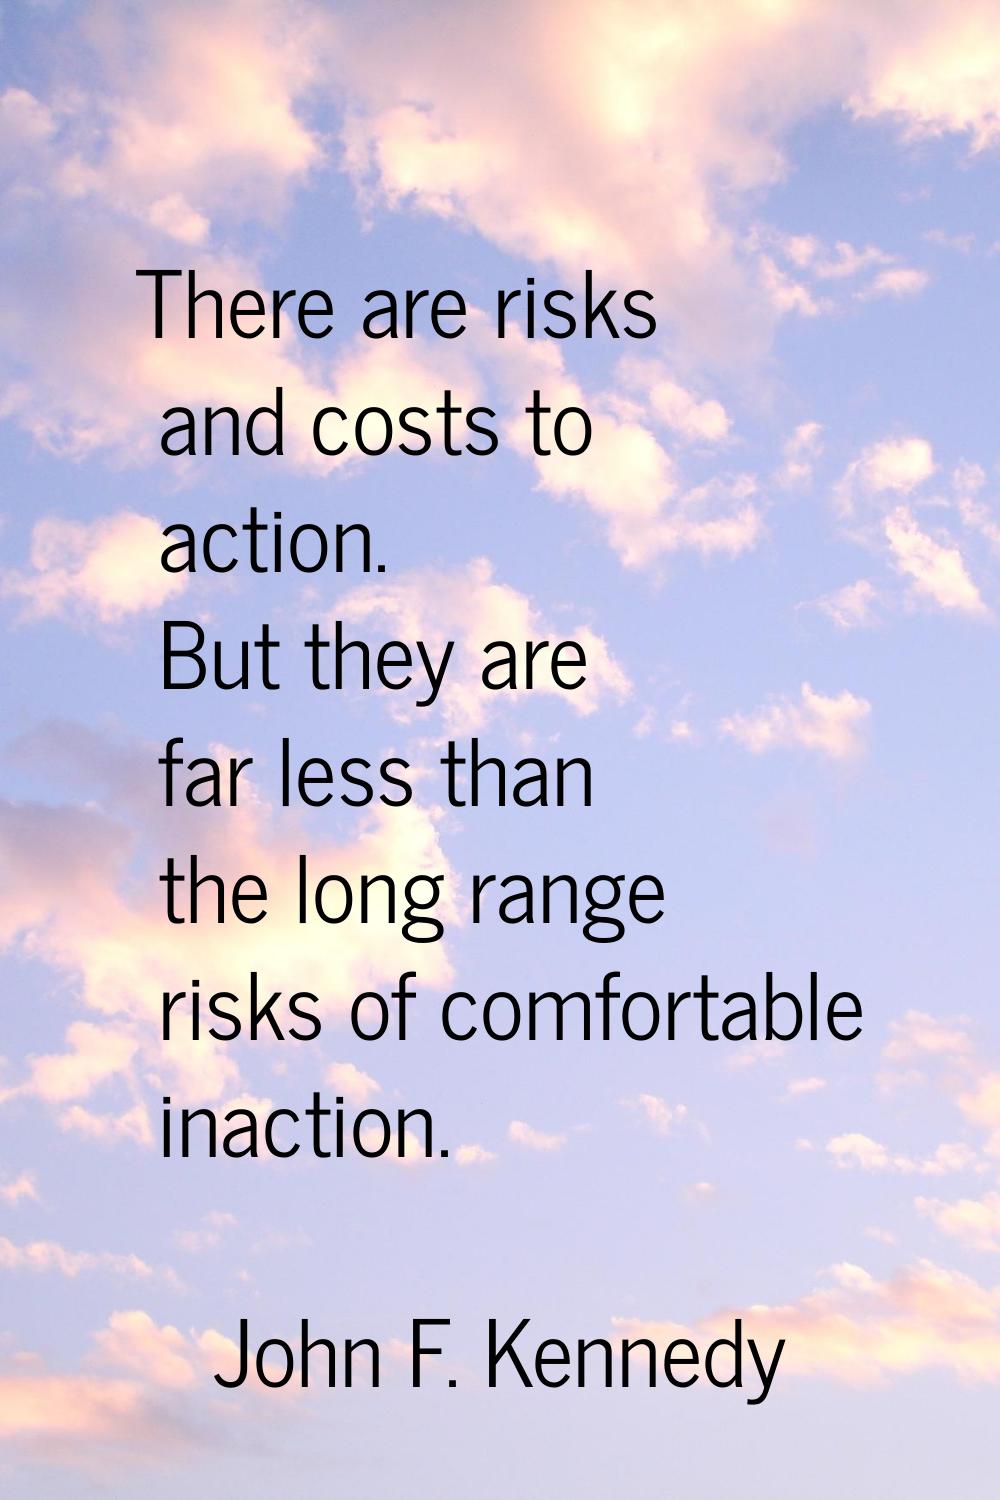 There are risks and costs to action. But they are far less than the long range risks of comfortable